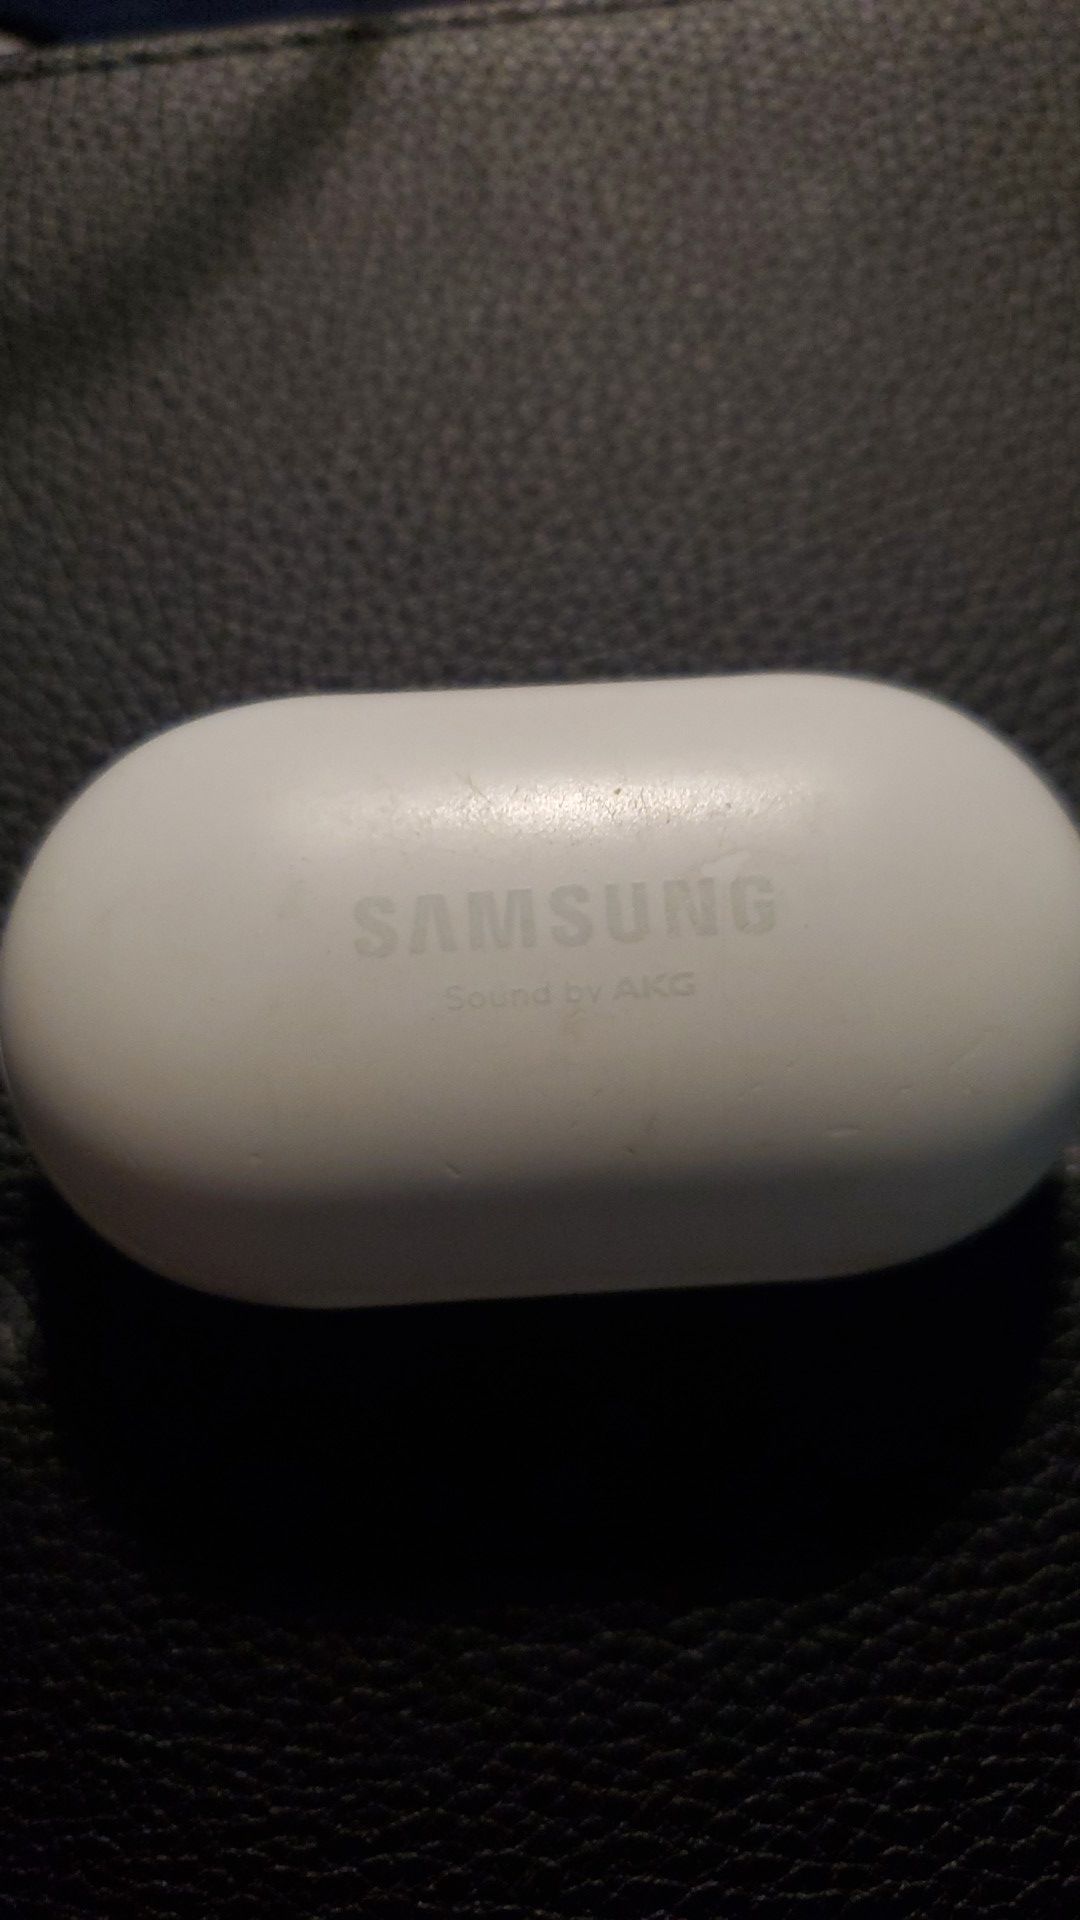 Galaxy buds charger